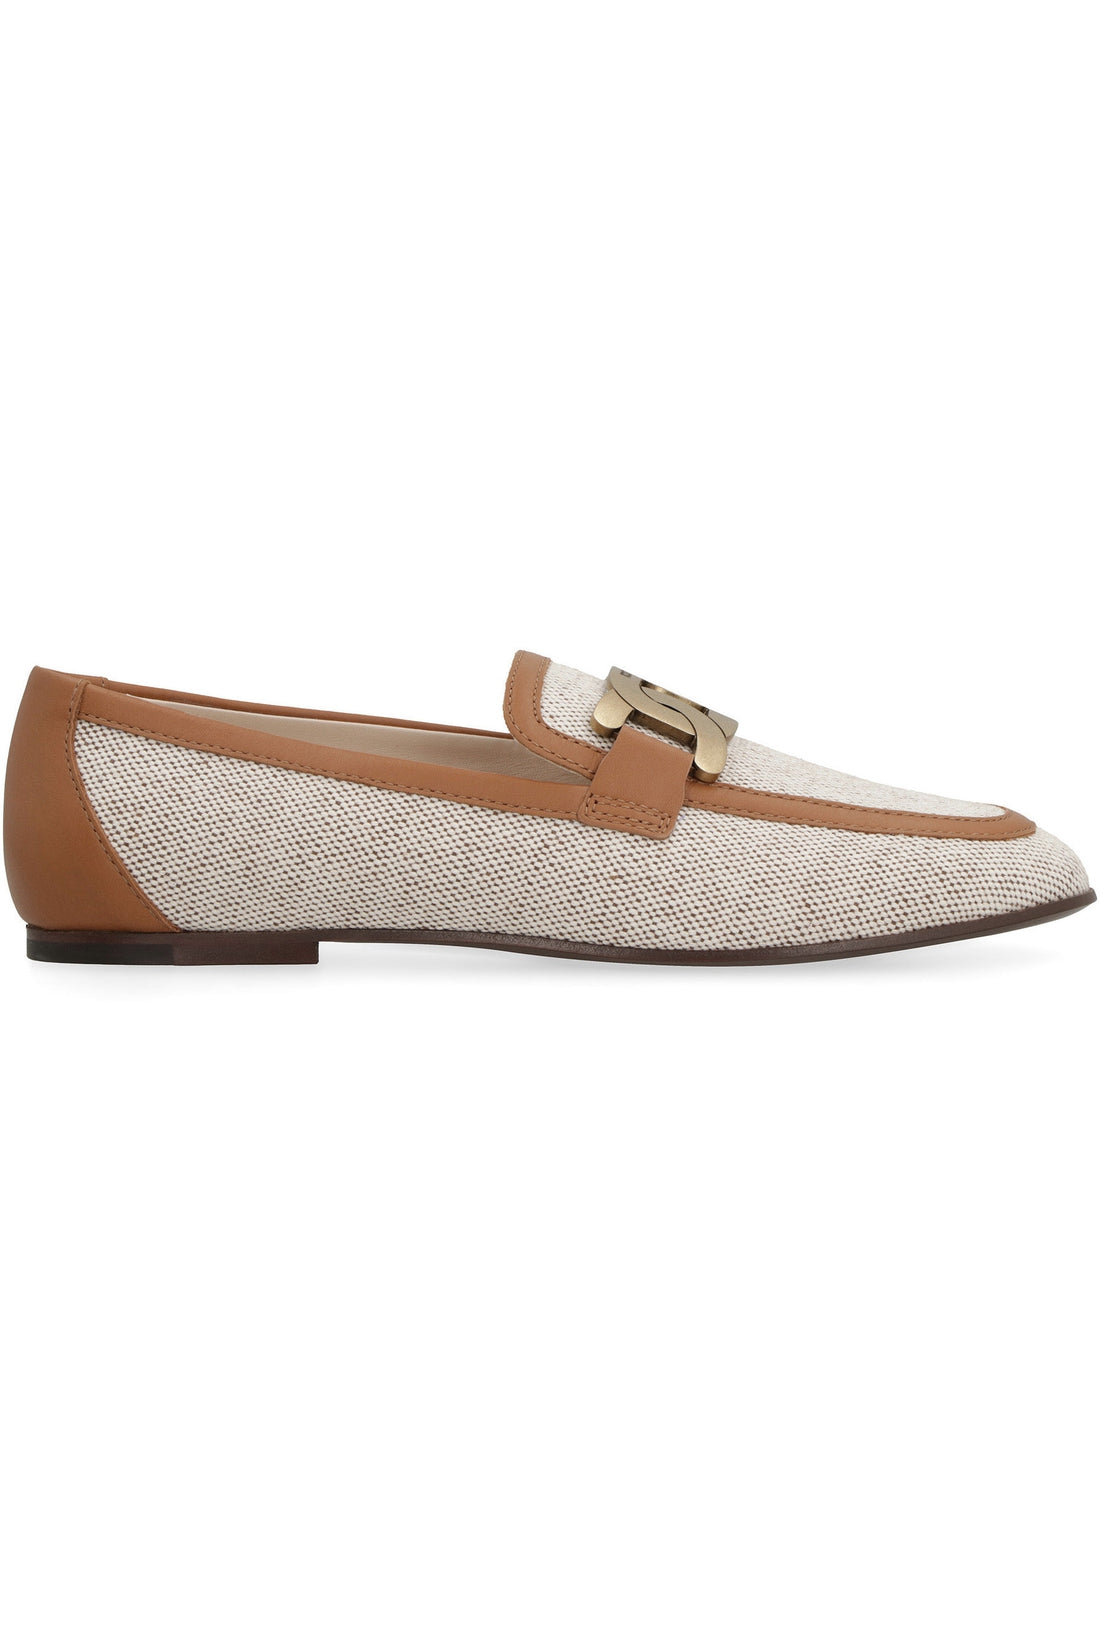 Tod's-OUTLET-SALE-Kate canvas and leather loafers-ARCHIVIST